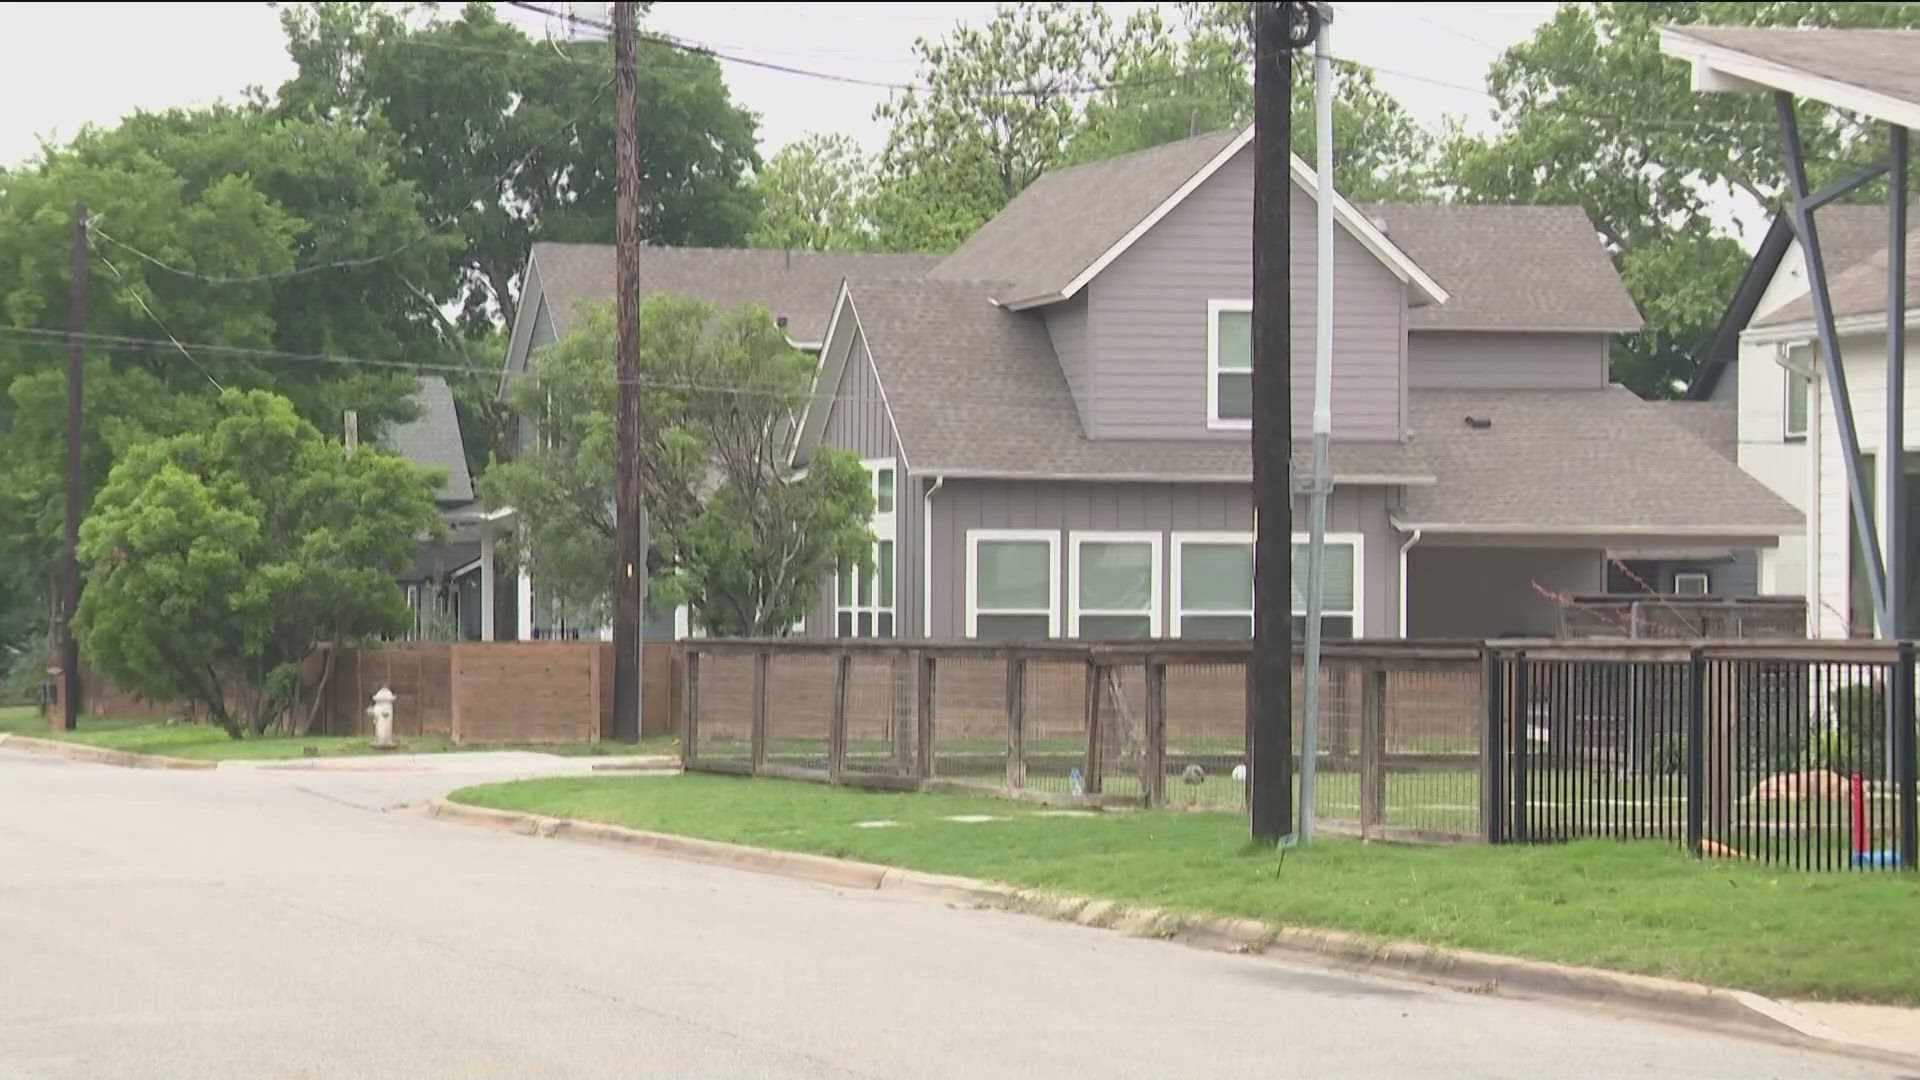 More Texas homeowners say they're being kicked out of their own properties by squatters. State lawmakers are trying to figure out how to fix that.